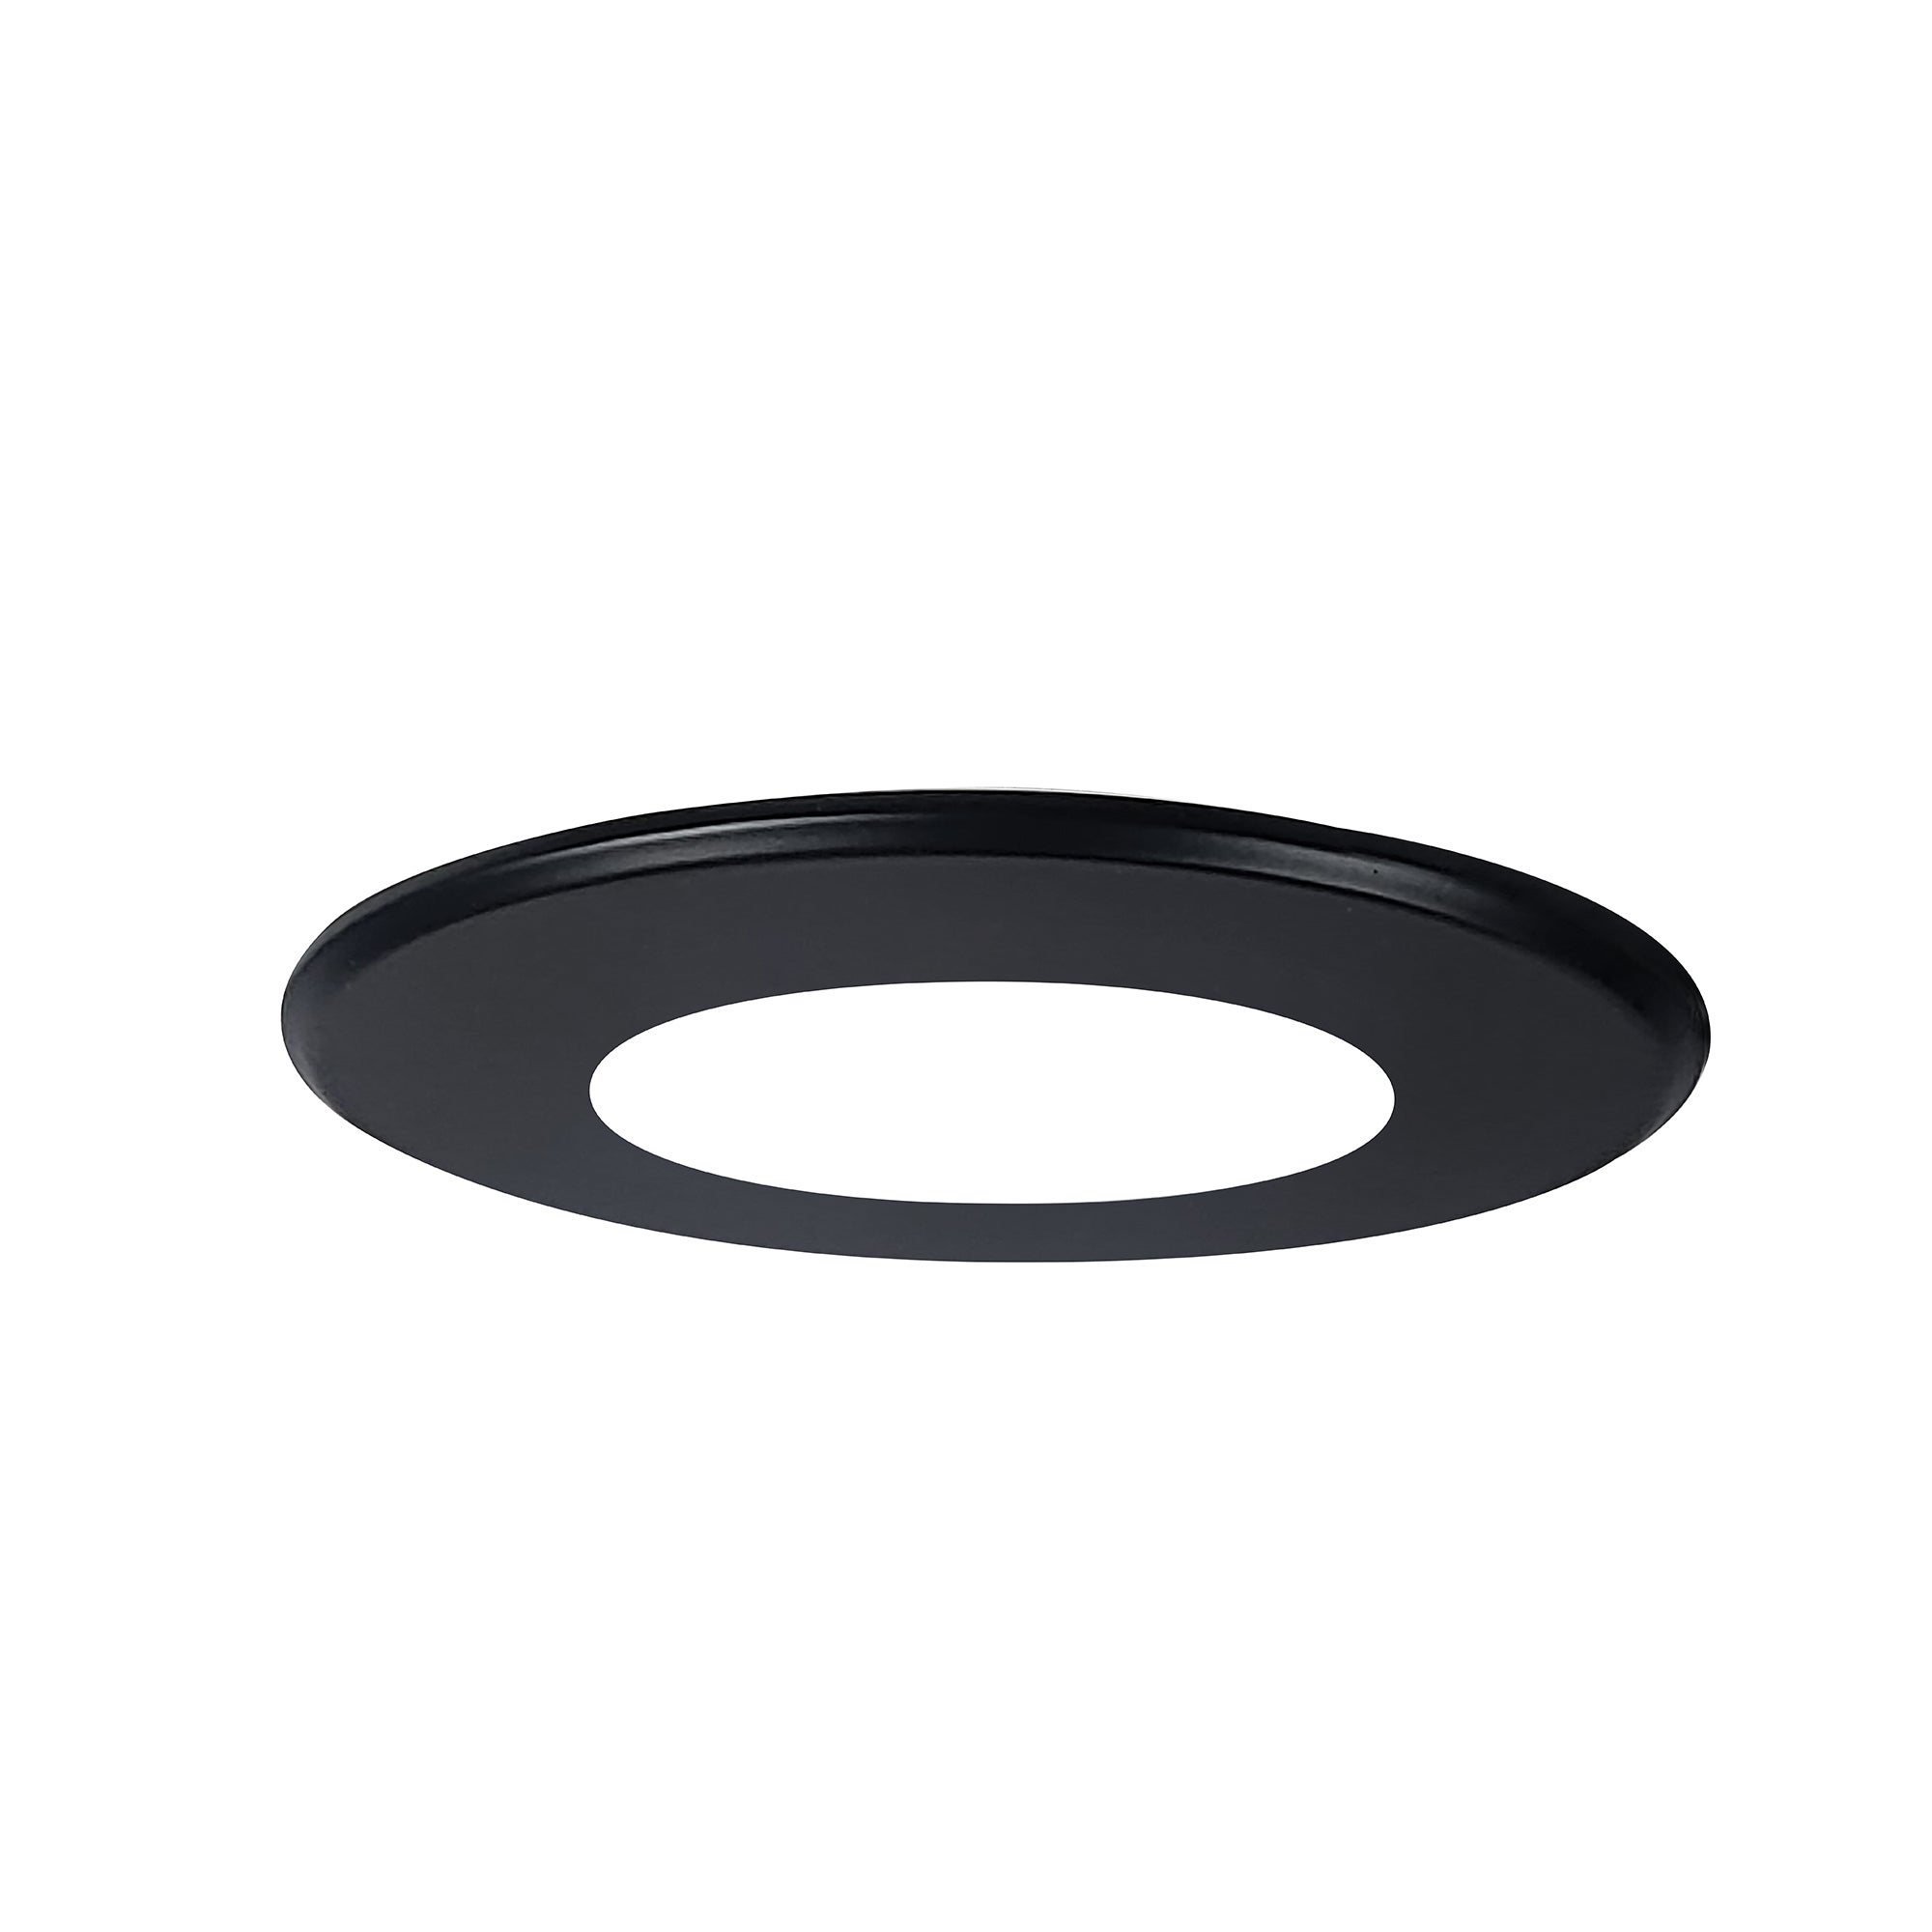 Nora Lighting NSLIM-4RDTB - Surface - Round Face Plate for NSLIM, Black Finish